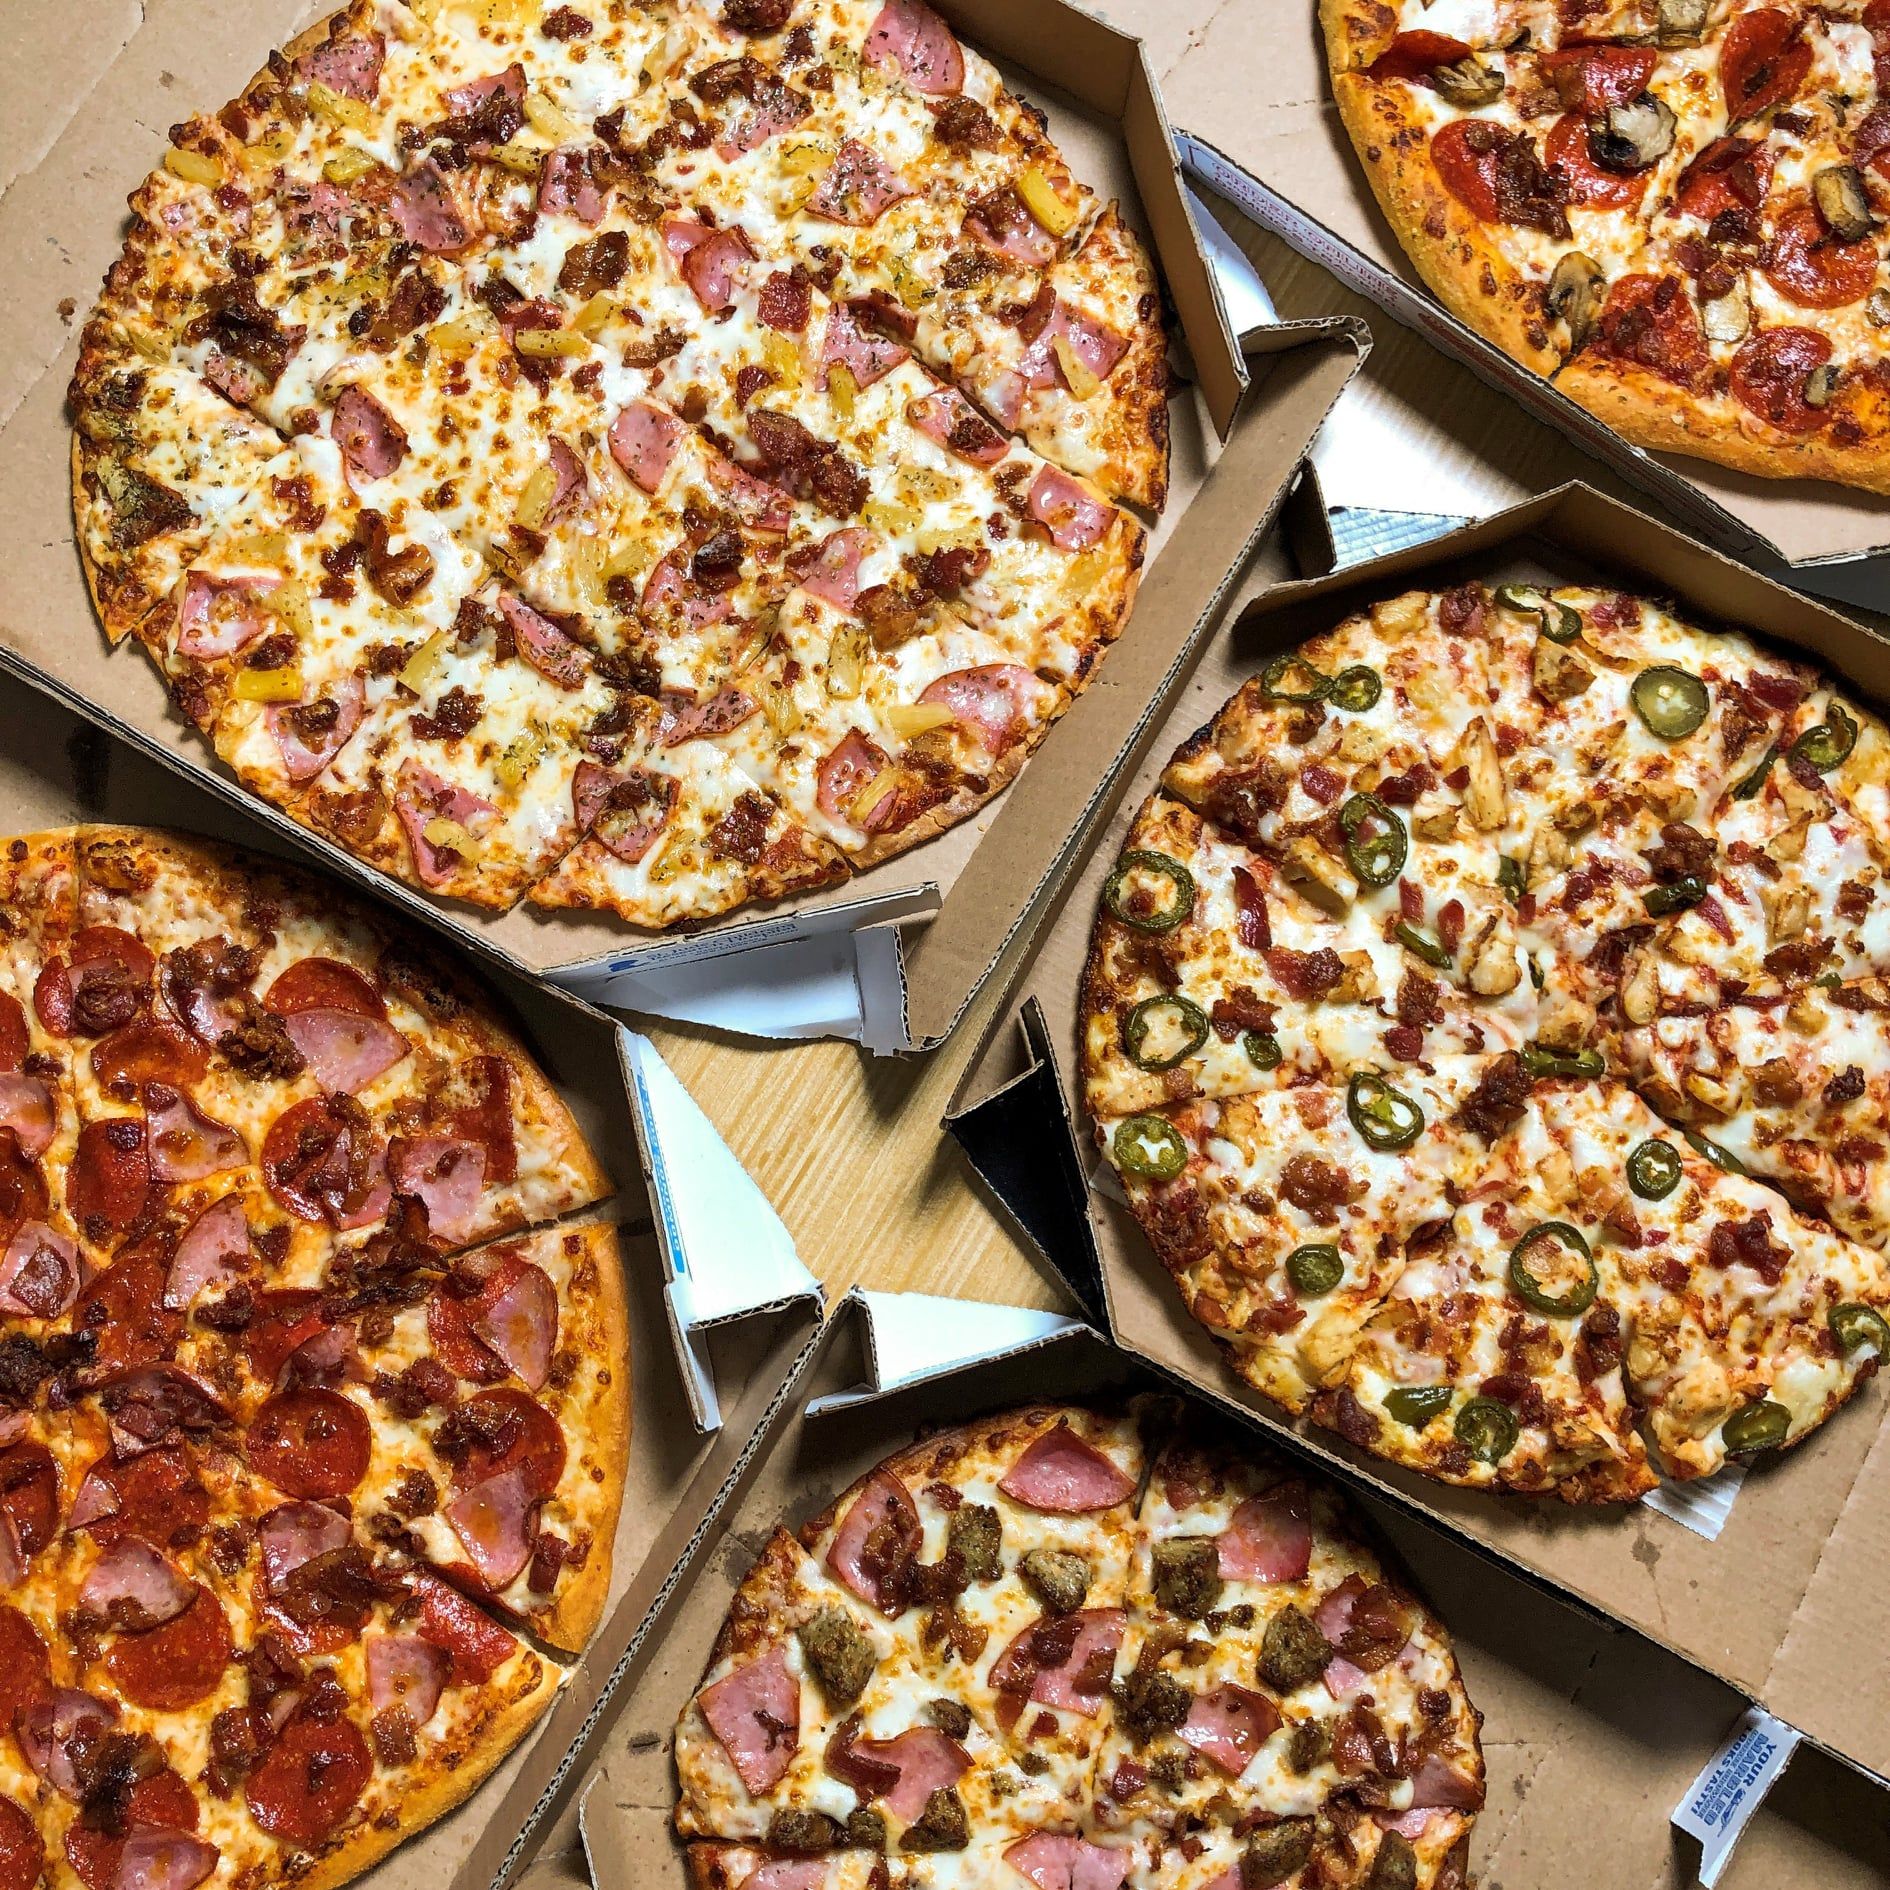 National Pizza Month Deals In October 2019 How To Get Free Pizza From Pizza Hut